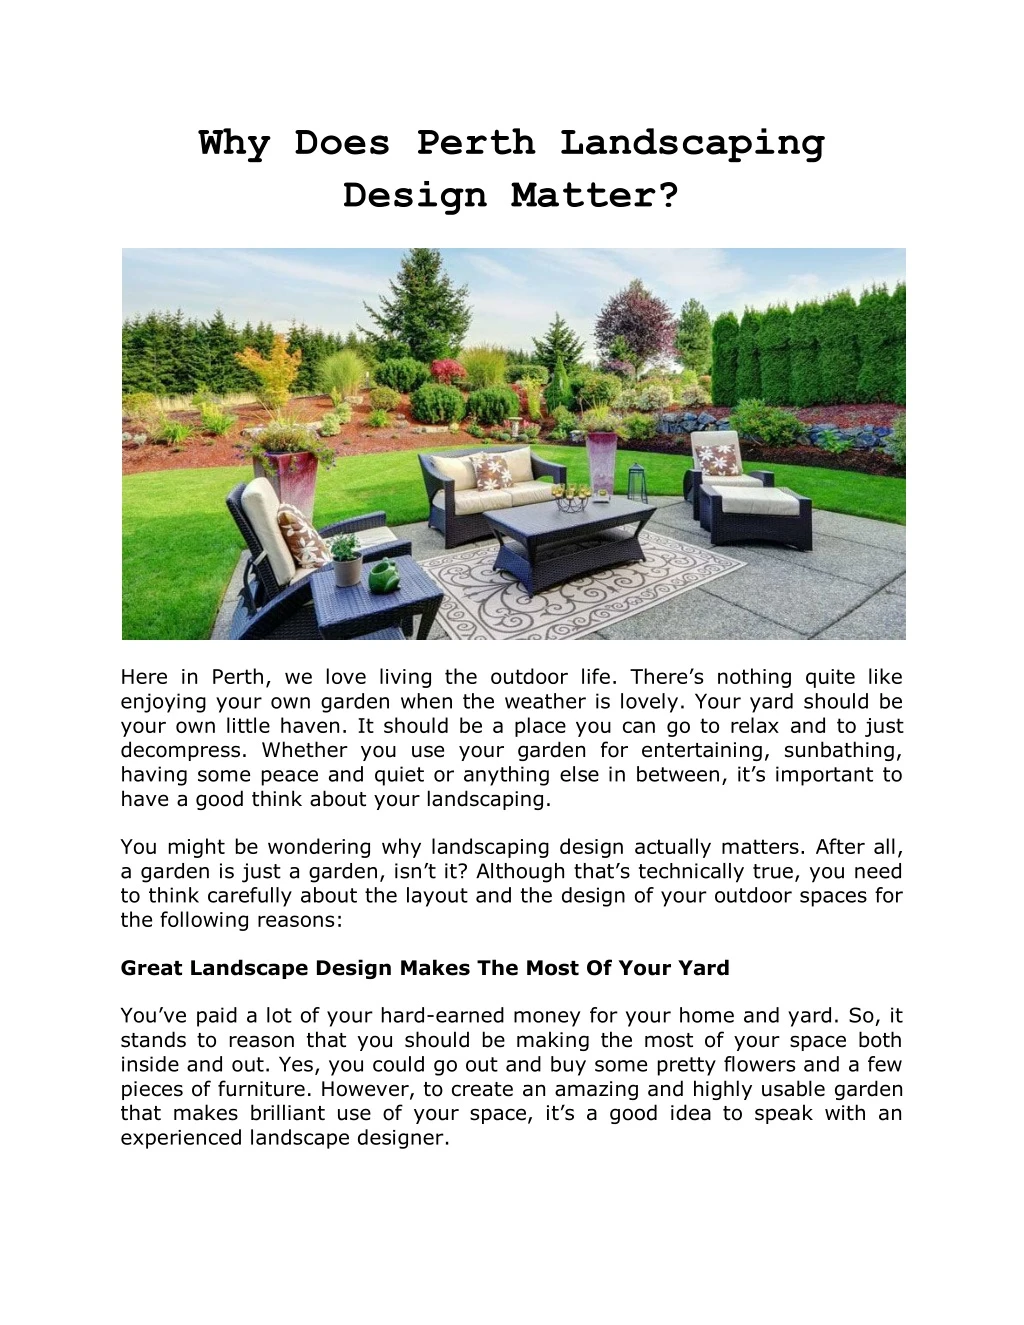 why does perth landscaping design matter